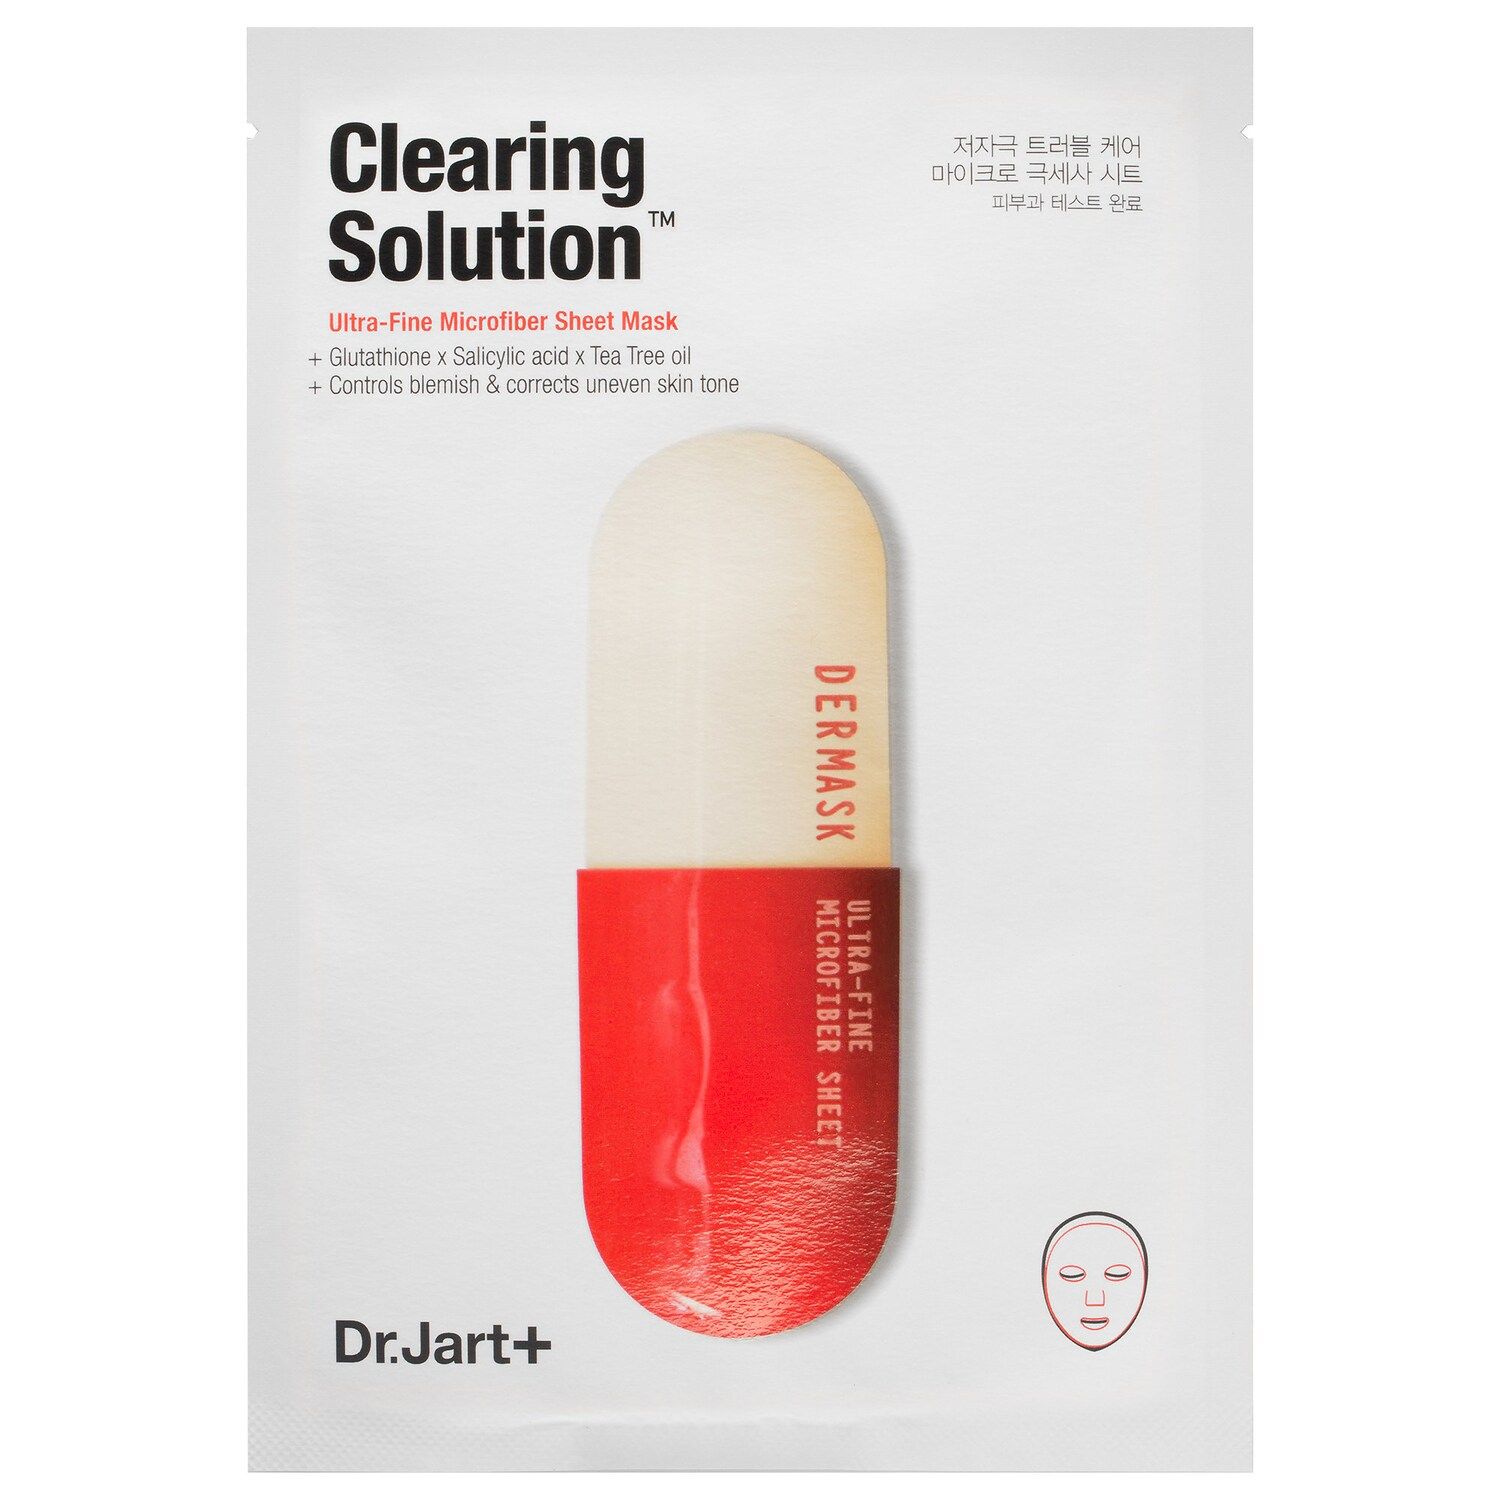 Dermask Micro Jet Clearing Solution